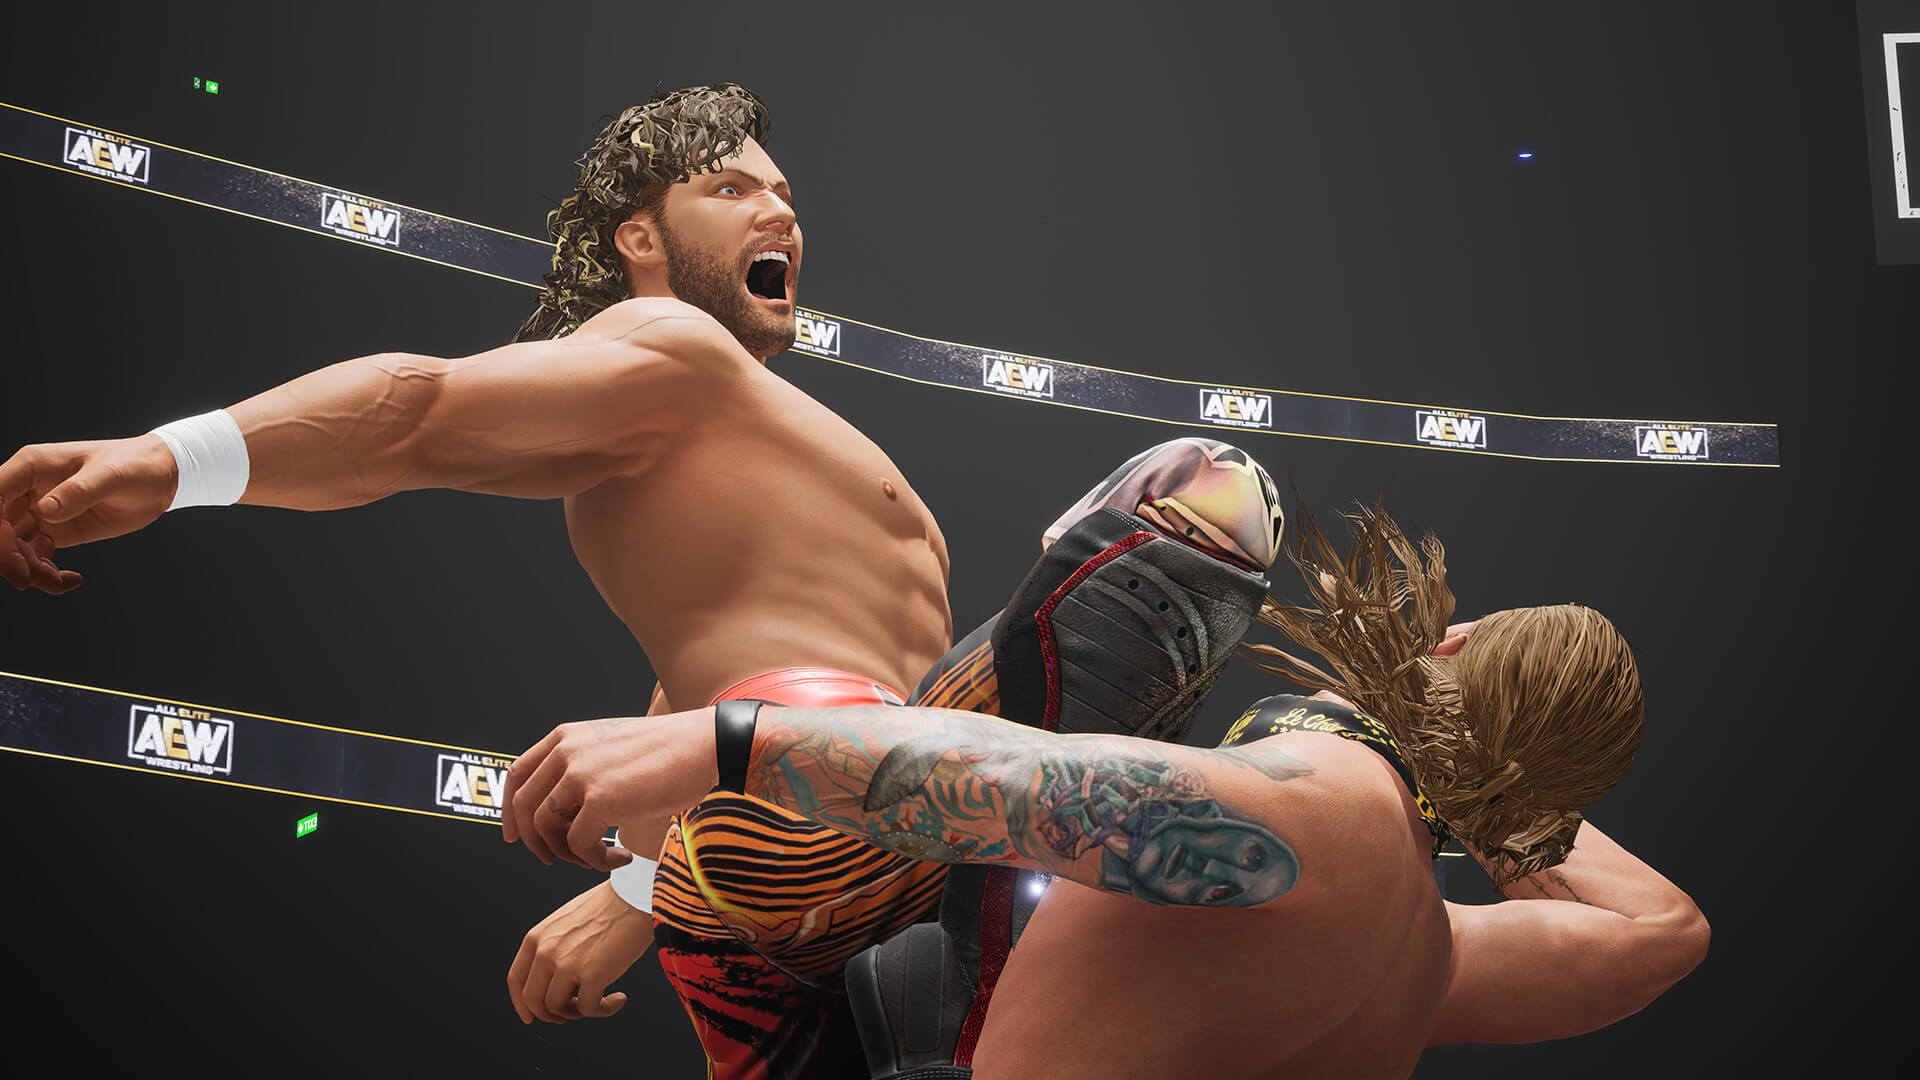 First full match gameplay footage from the wrestling game, AEW Fight